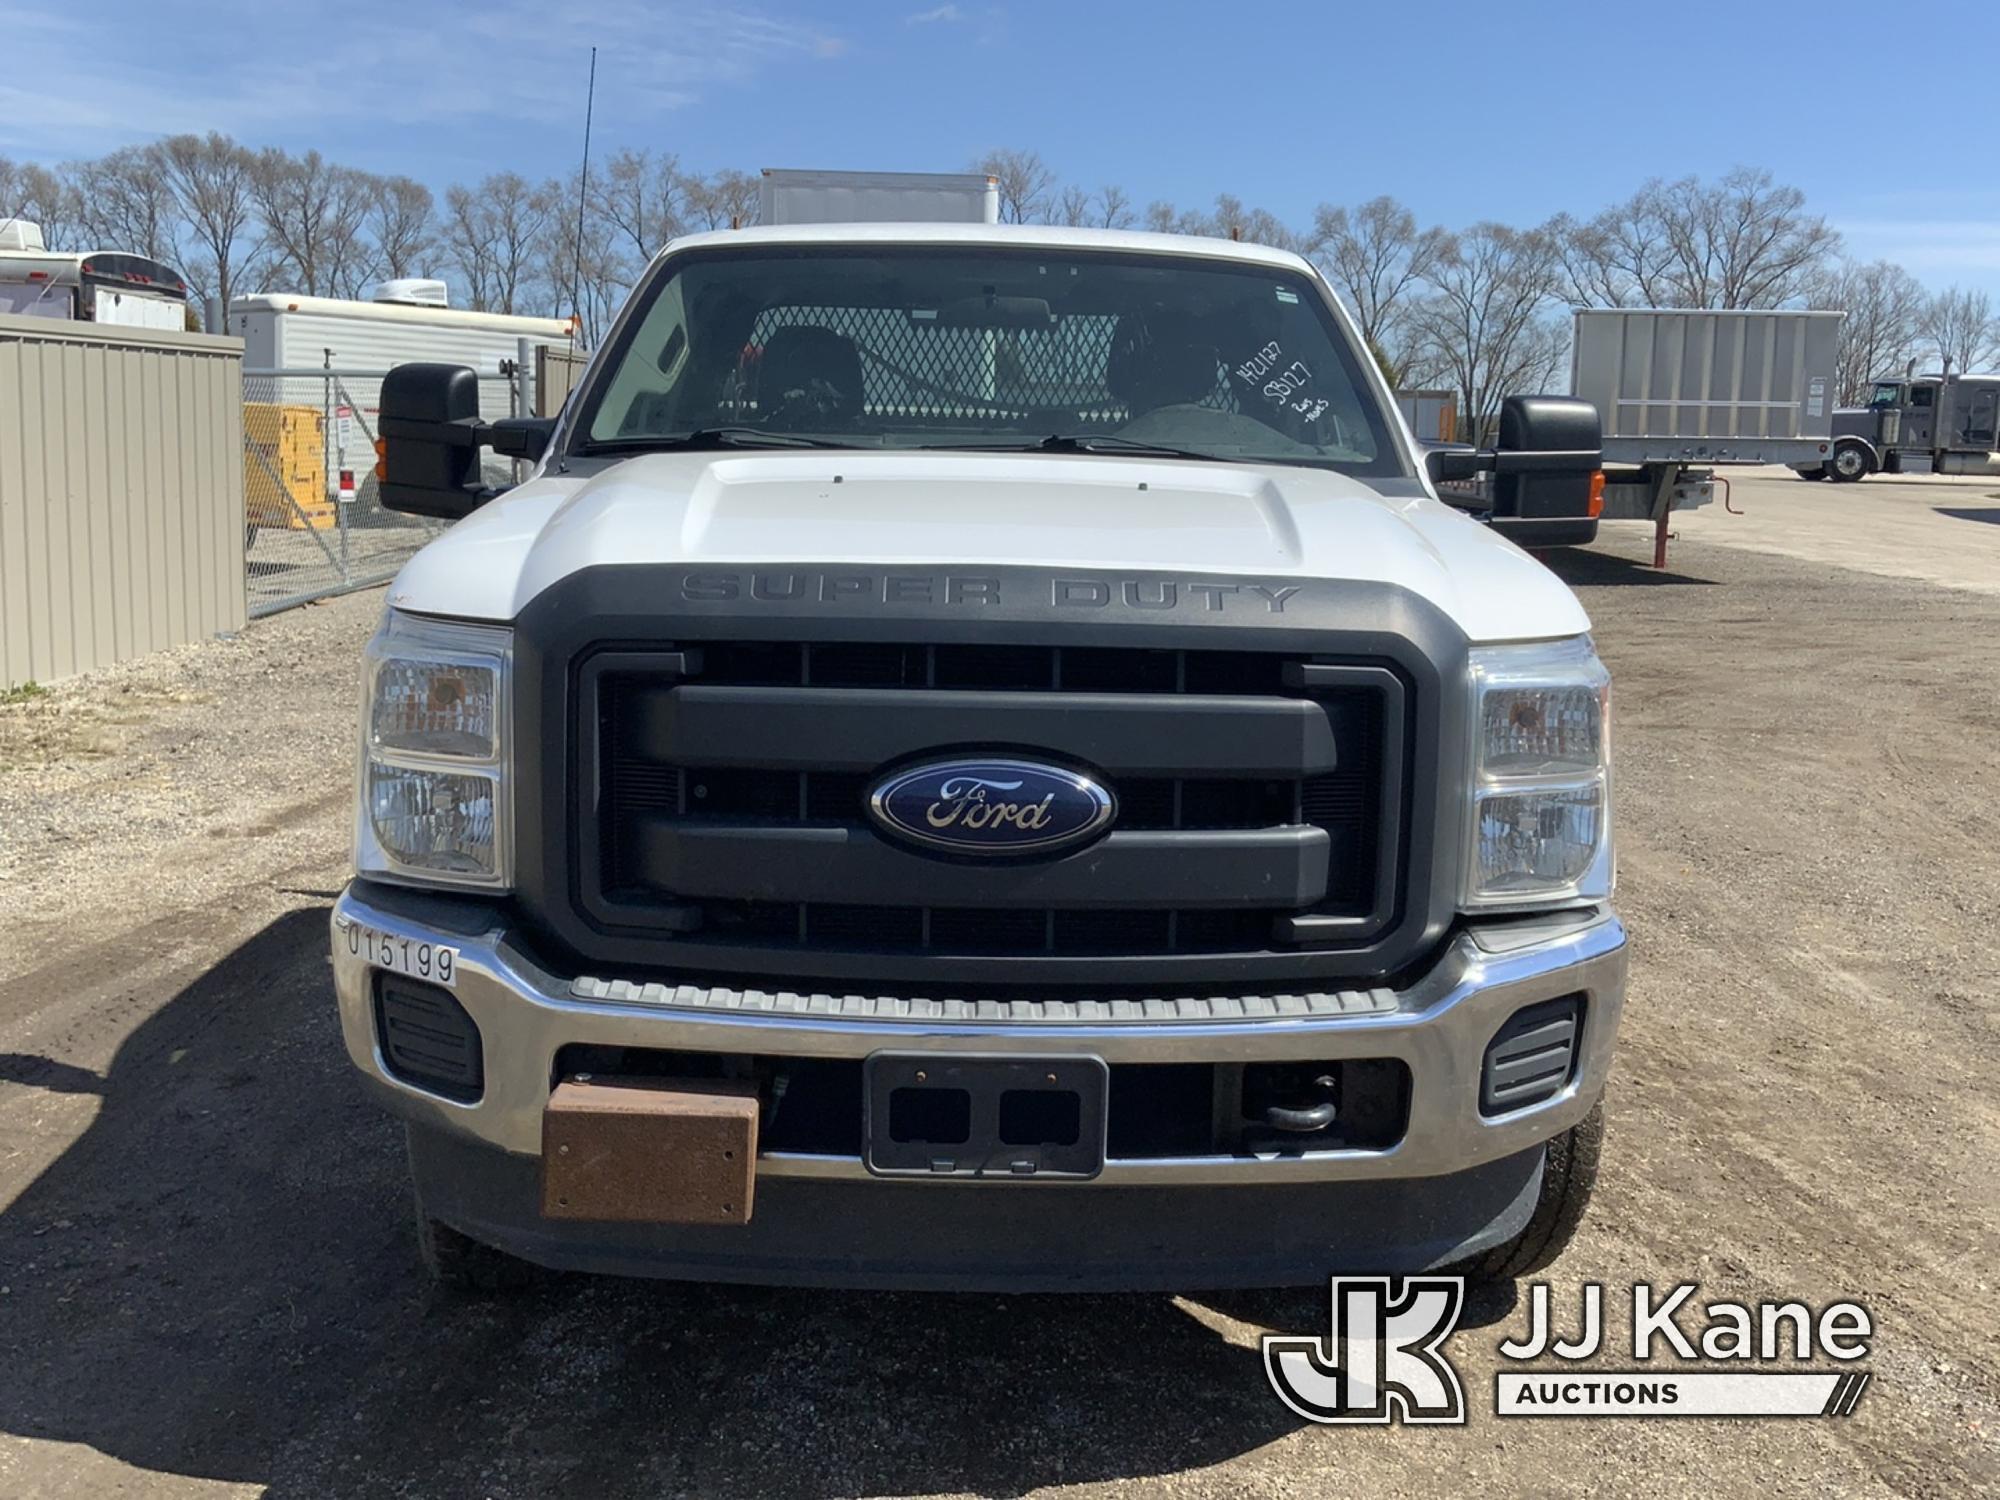 (South Beloit, IL) 2015 Ford F250 4x4 Extended-Cab Pickup Truck Runs & Moves) (Body Damage